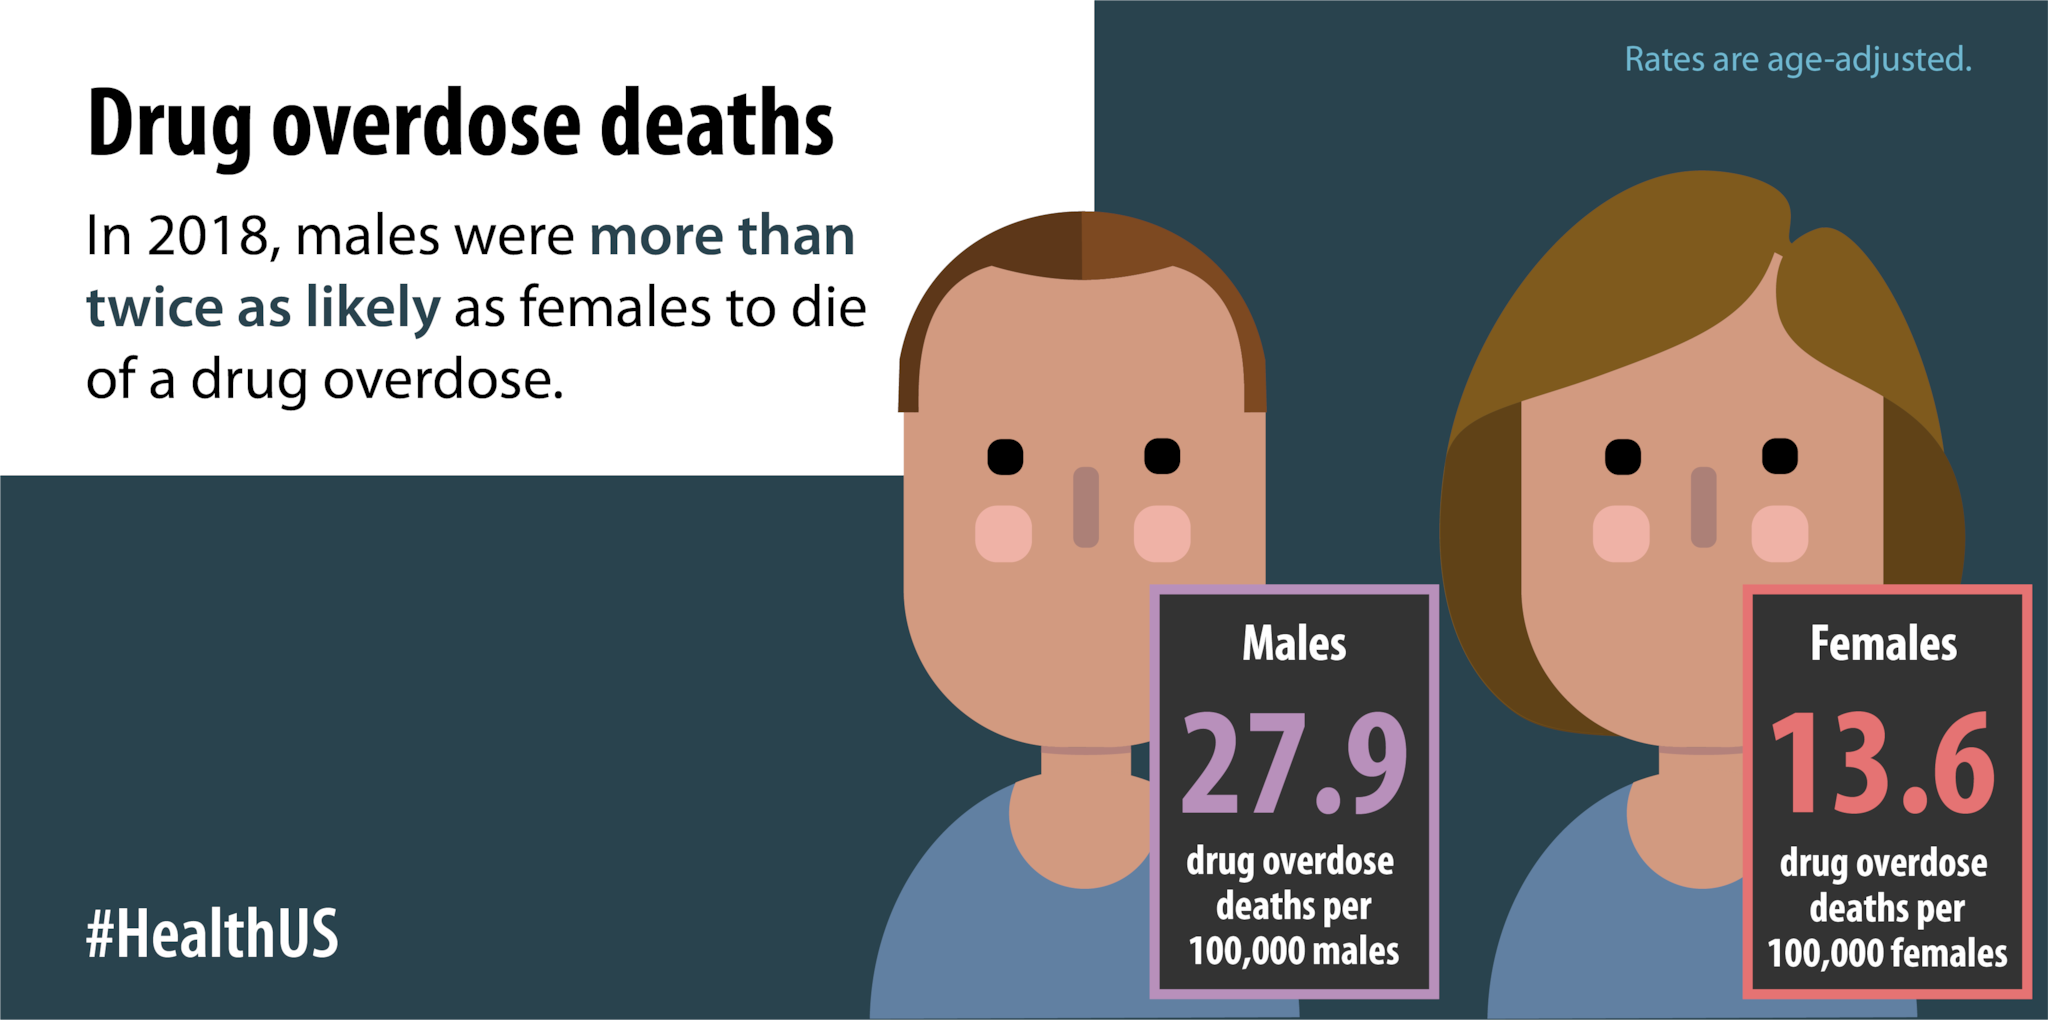 In 2018, males were more than twice as likely as females to die of a drug overdose.